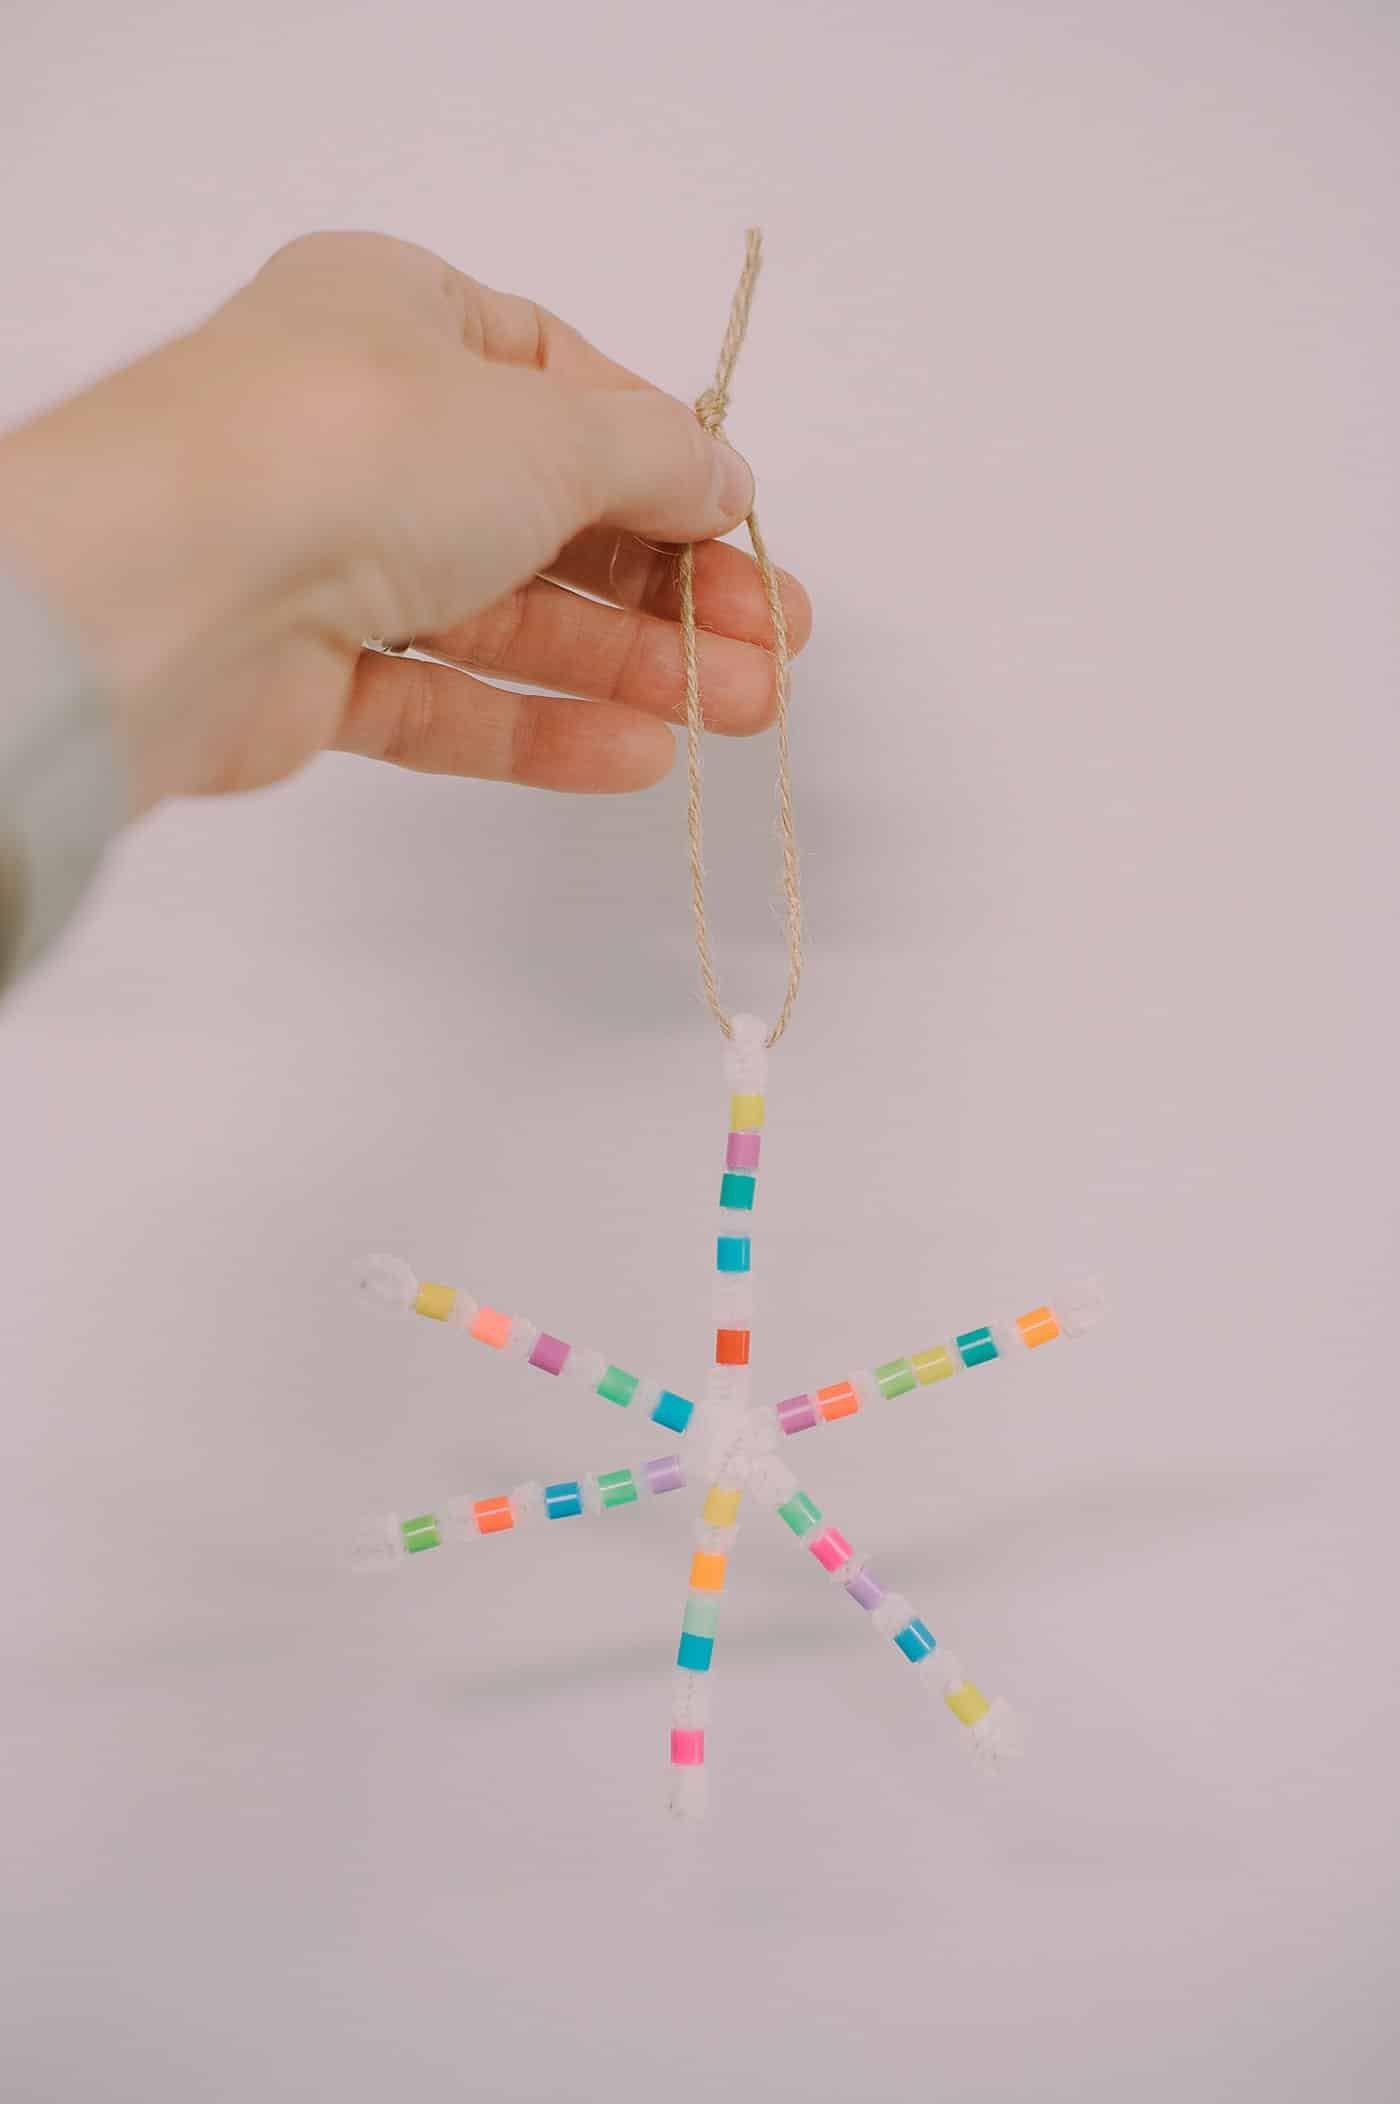 Pipe Cleaner Snowflakes 